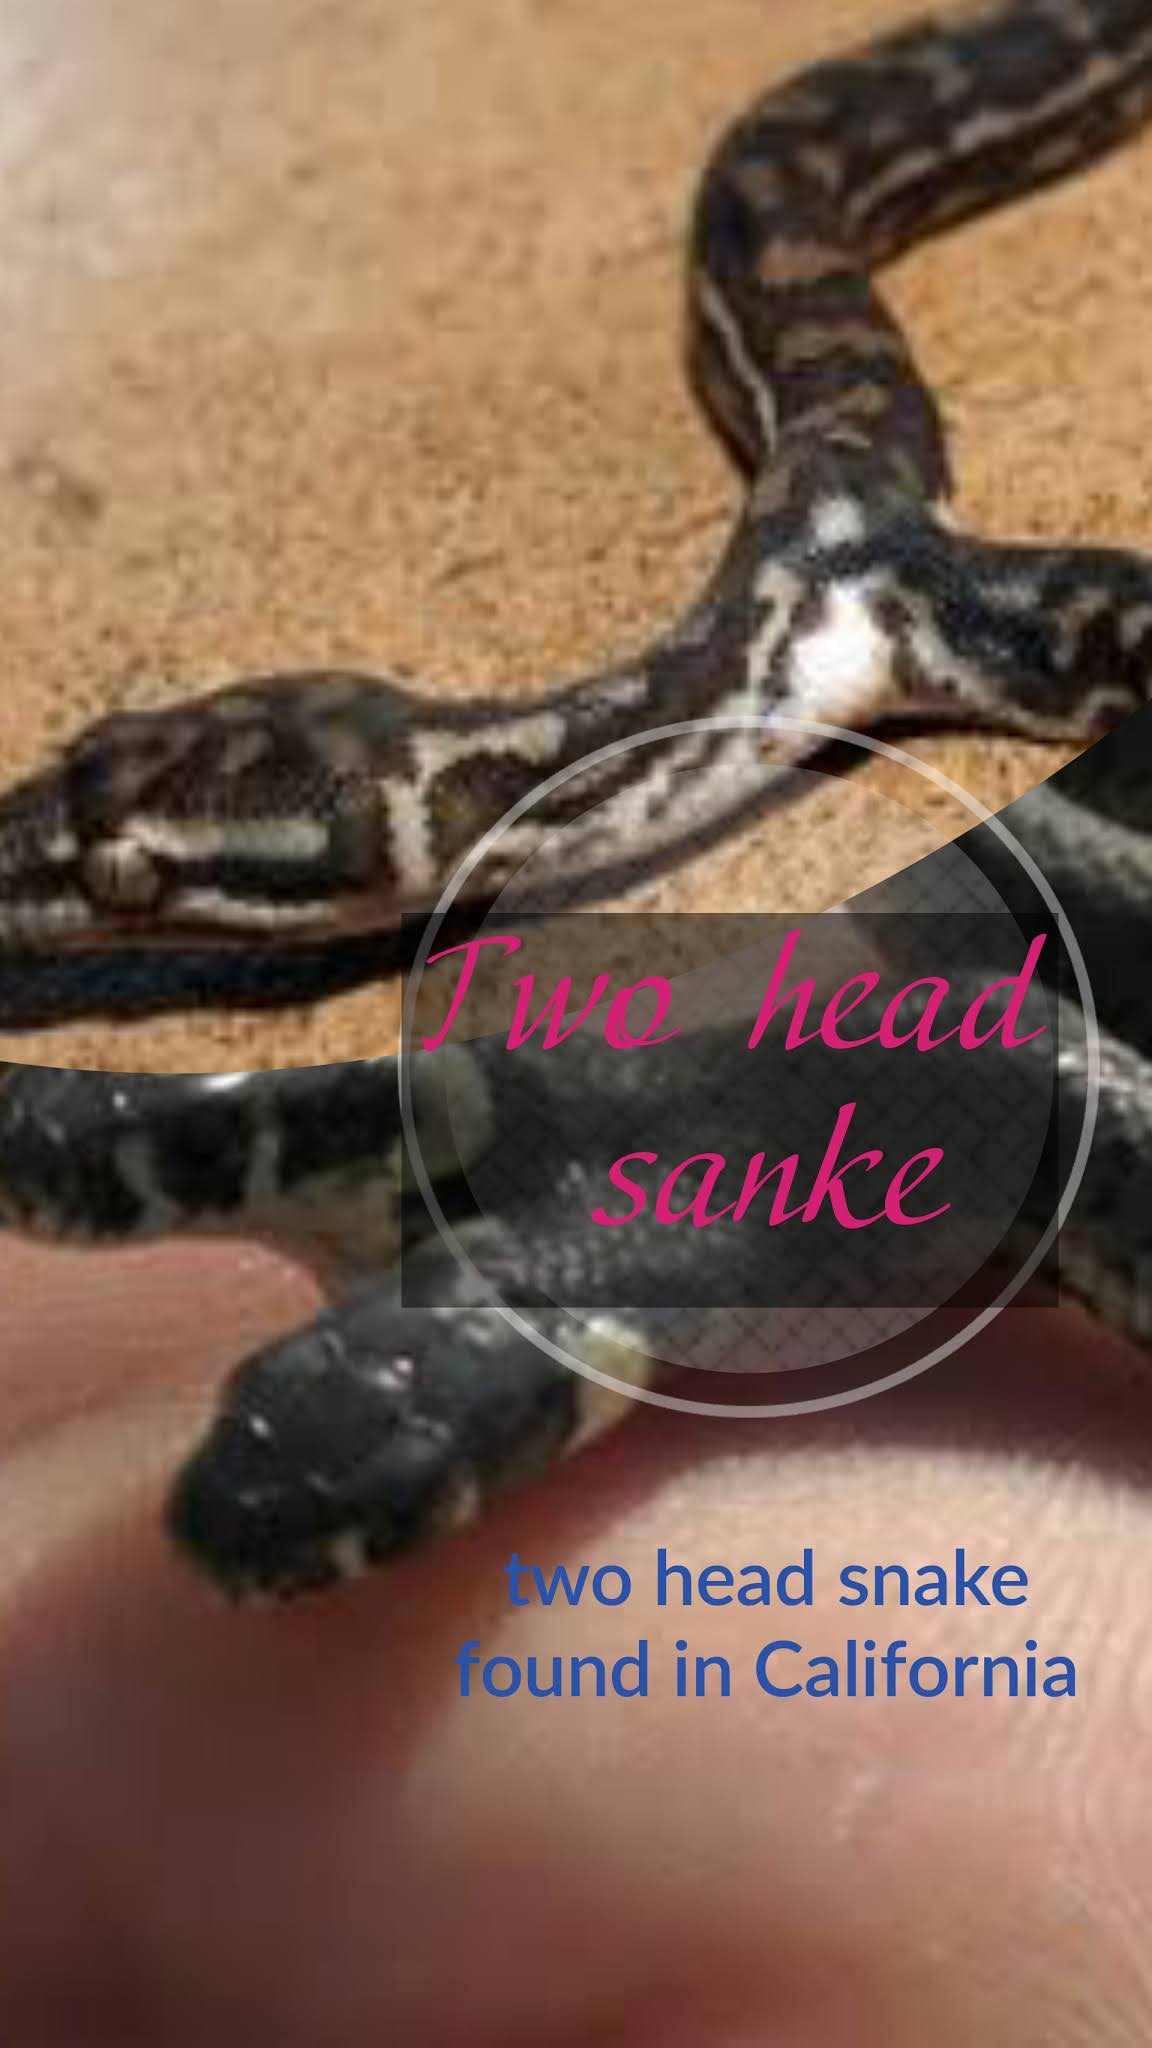 Carolina woman finds two headed snake in home